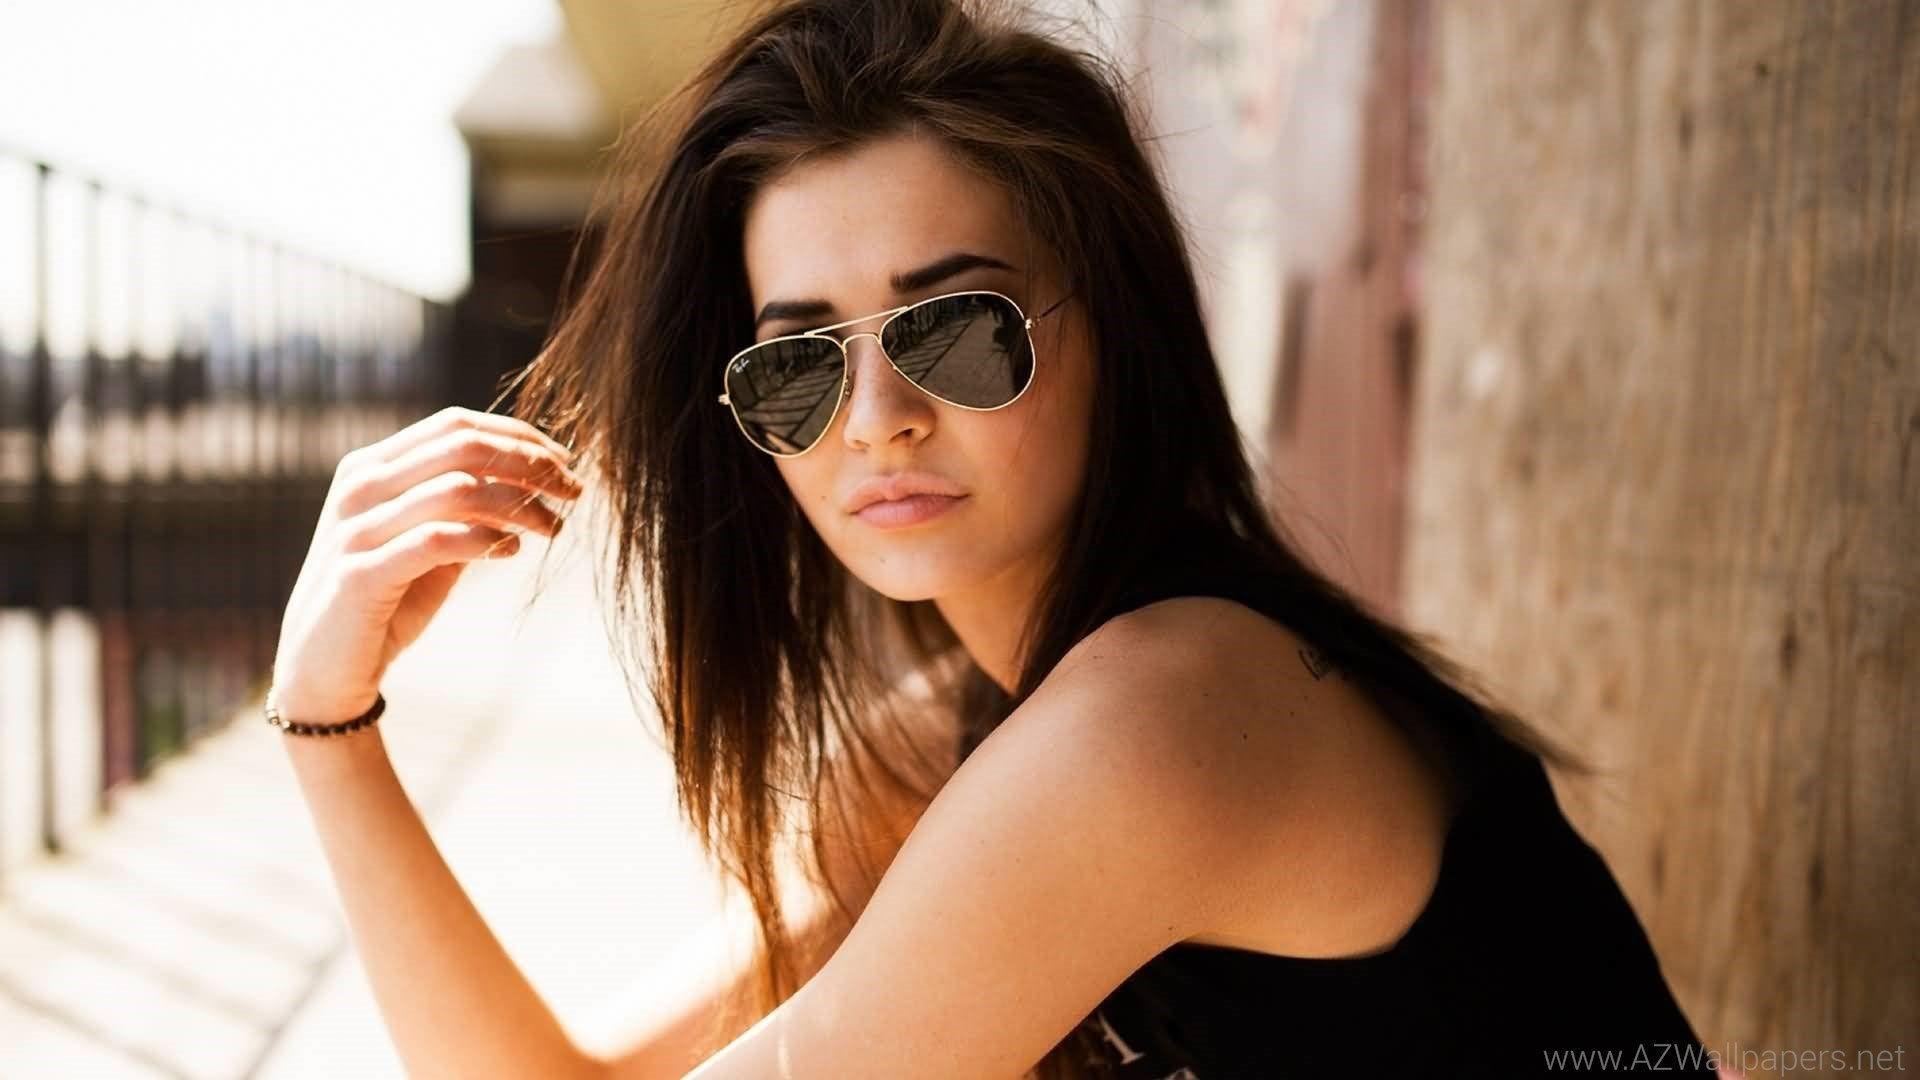 Cool Girl Wallpaper HD Wallpaper Background Of Your Choice